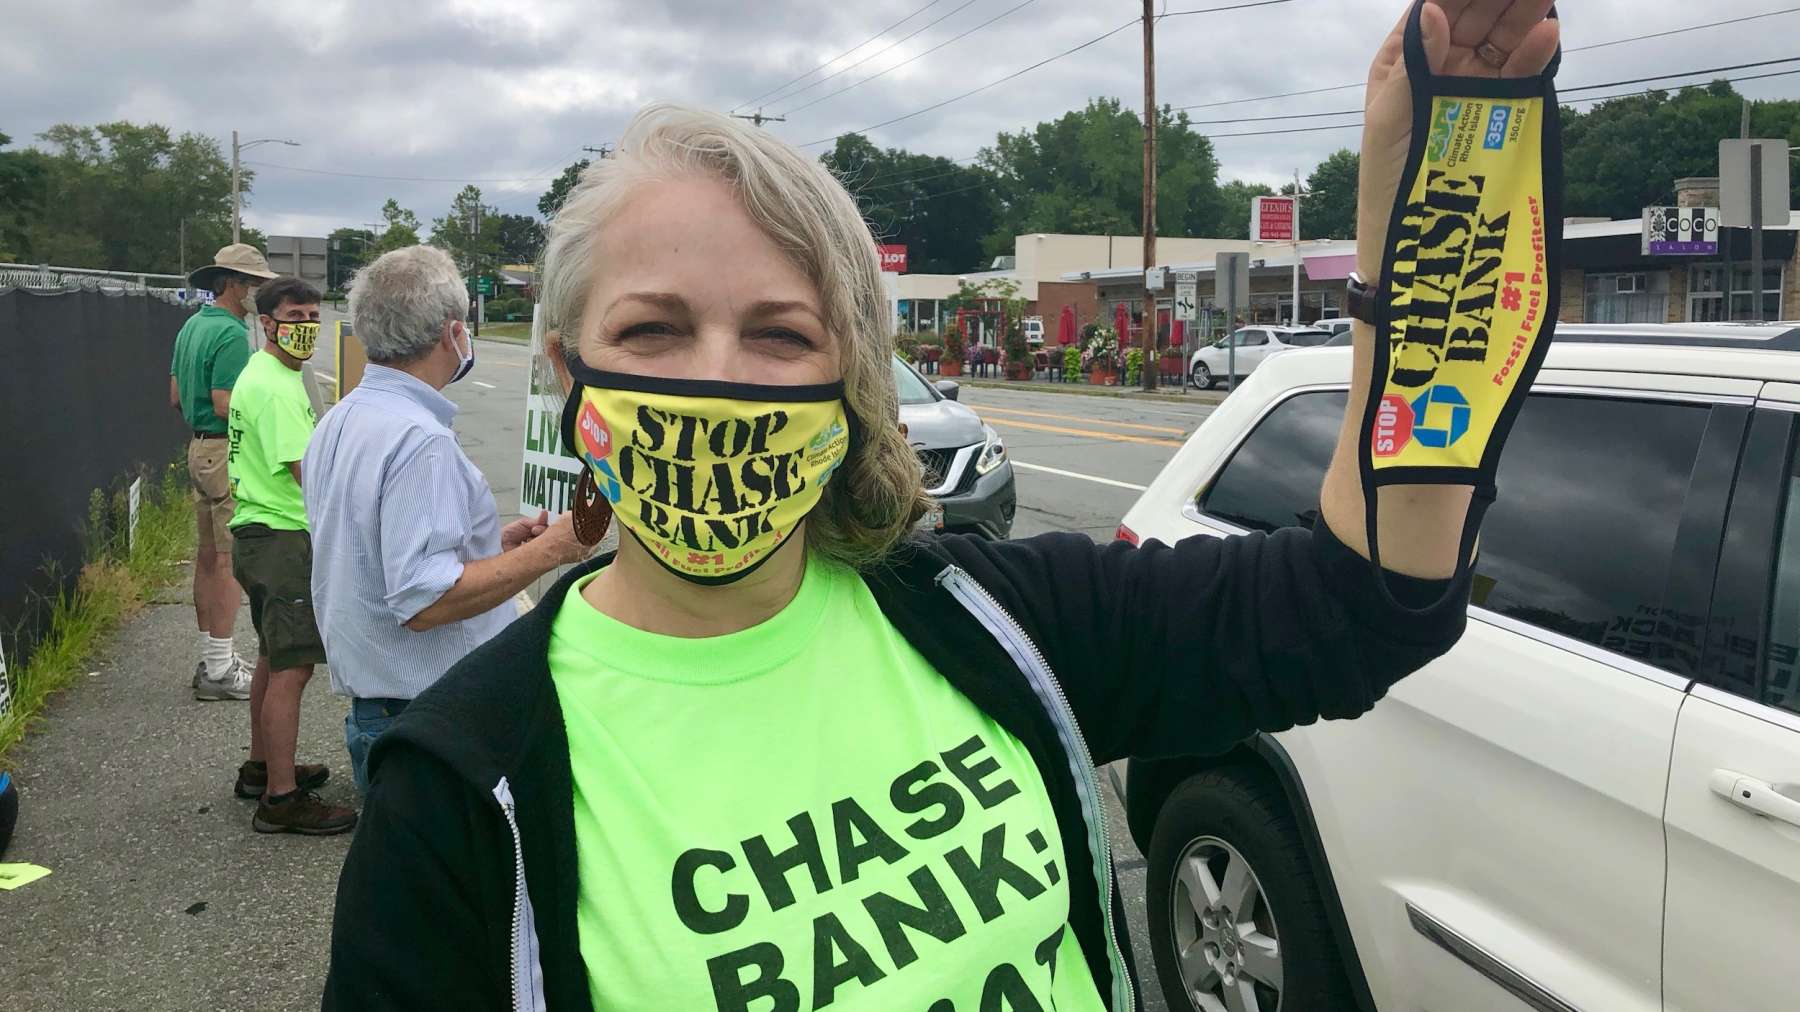 Rhode Island News: Chase Bank continues to expand in RI, continues to fund climate change